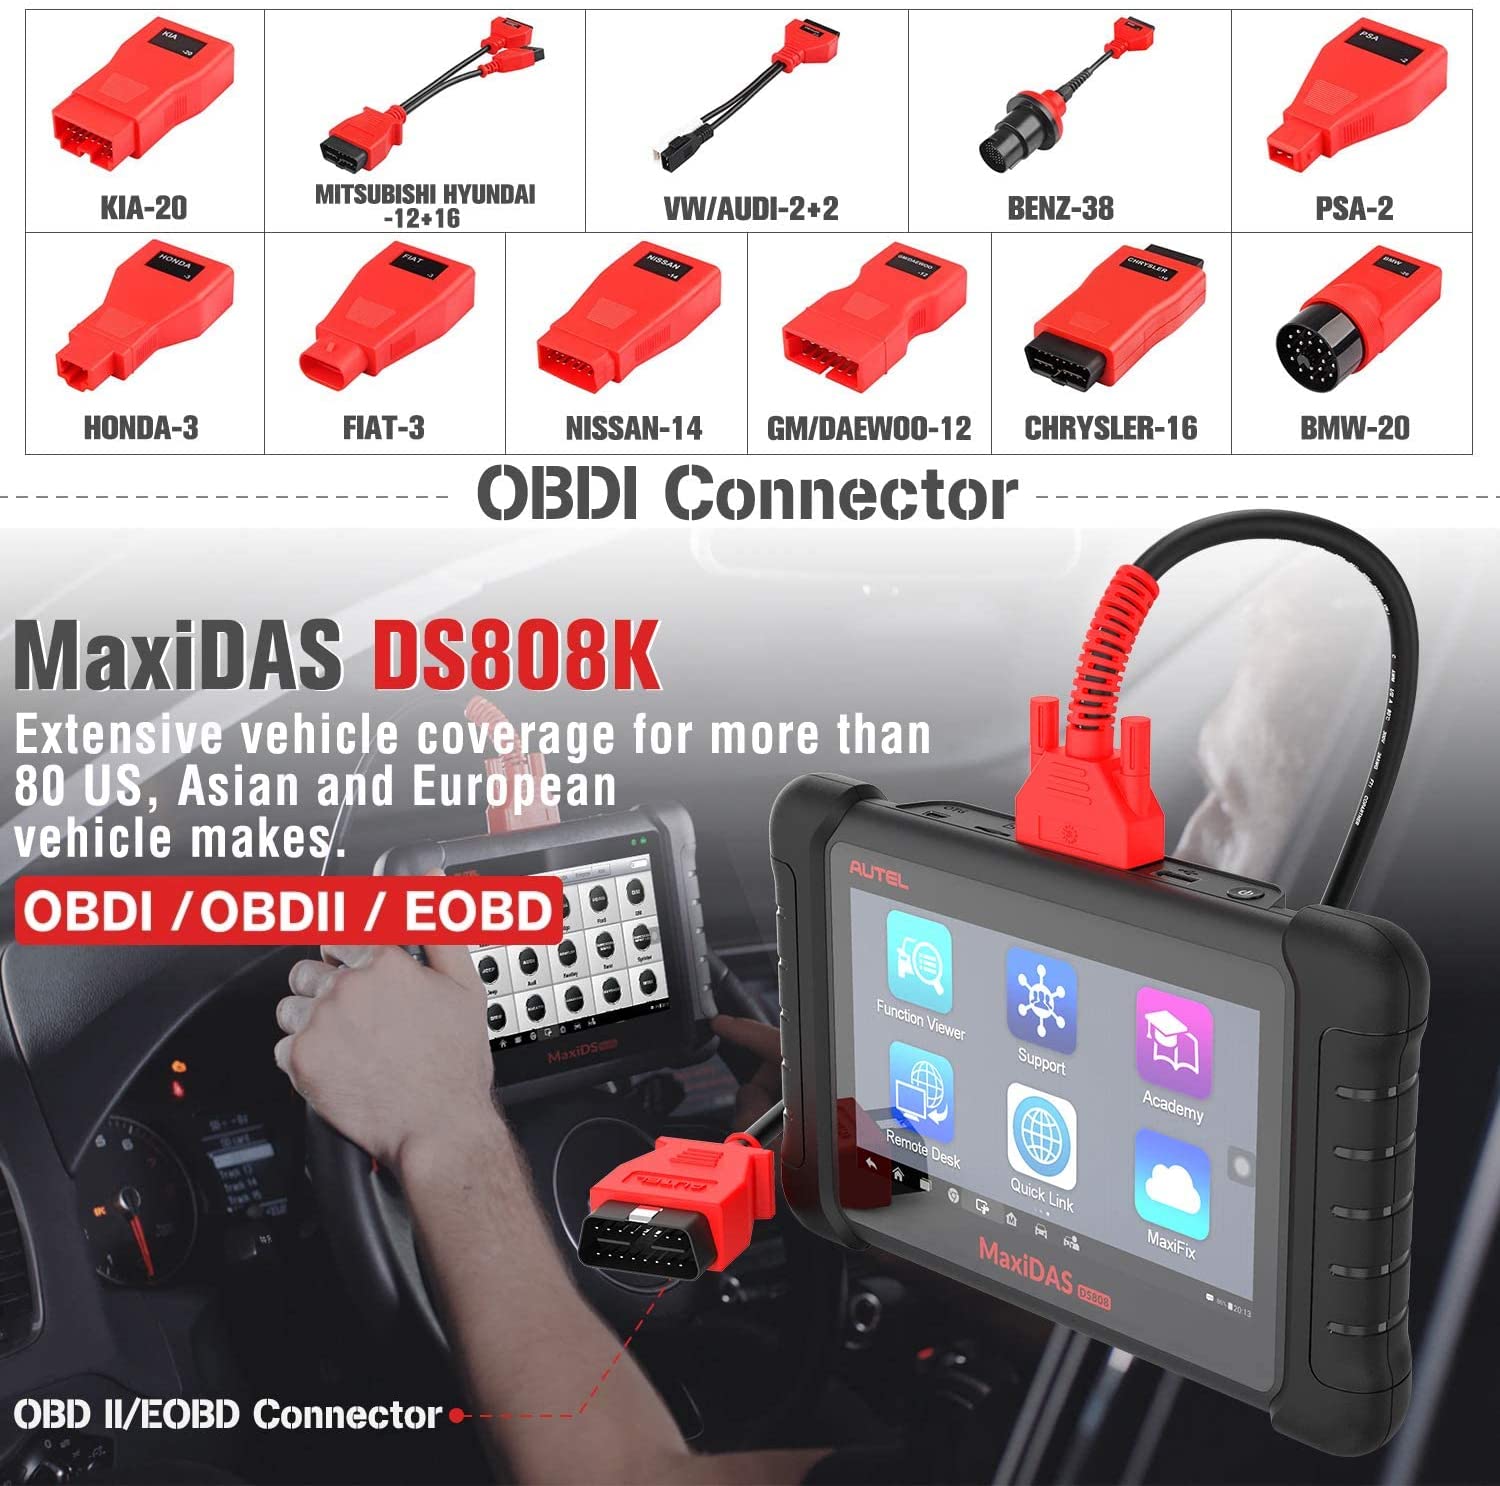 Autel MaxiDAS DS808K come with many adapters